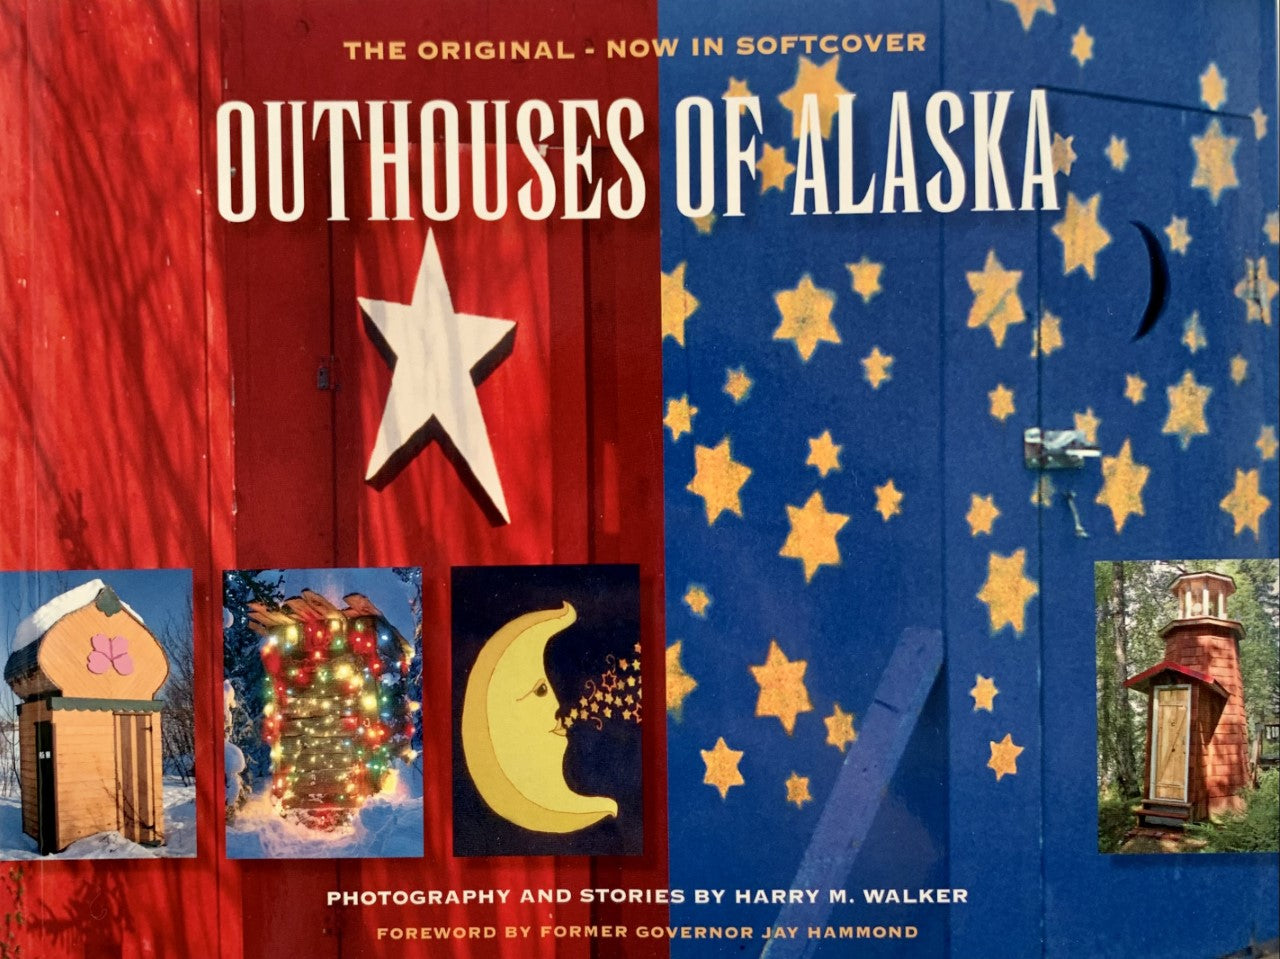 Outhouses of Alaska by Harry M. Walker